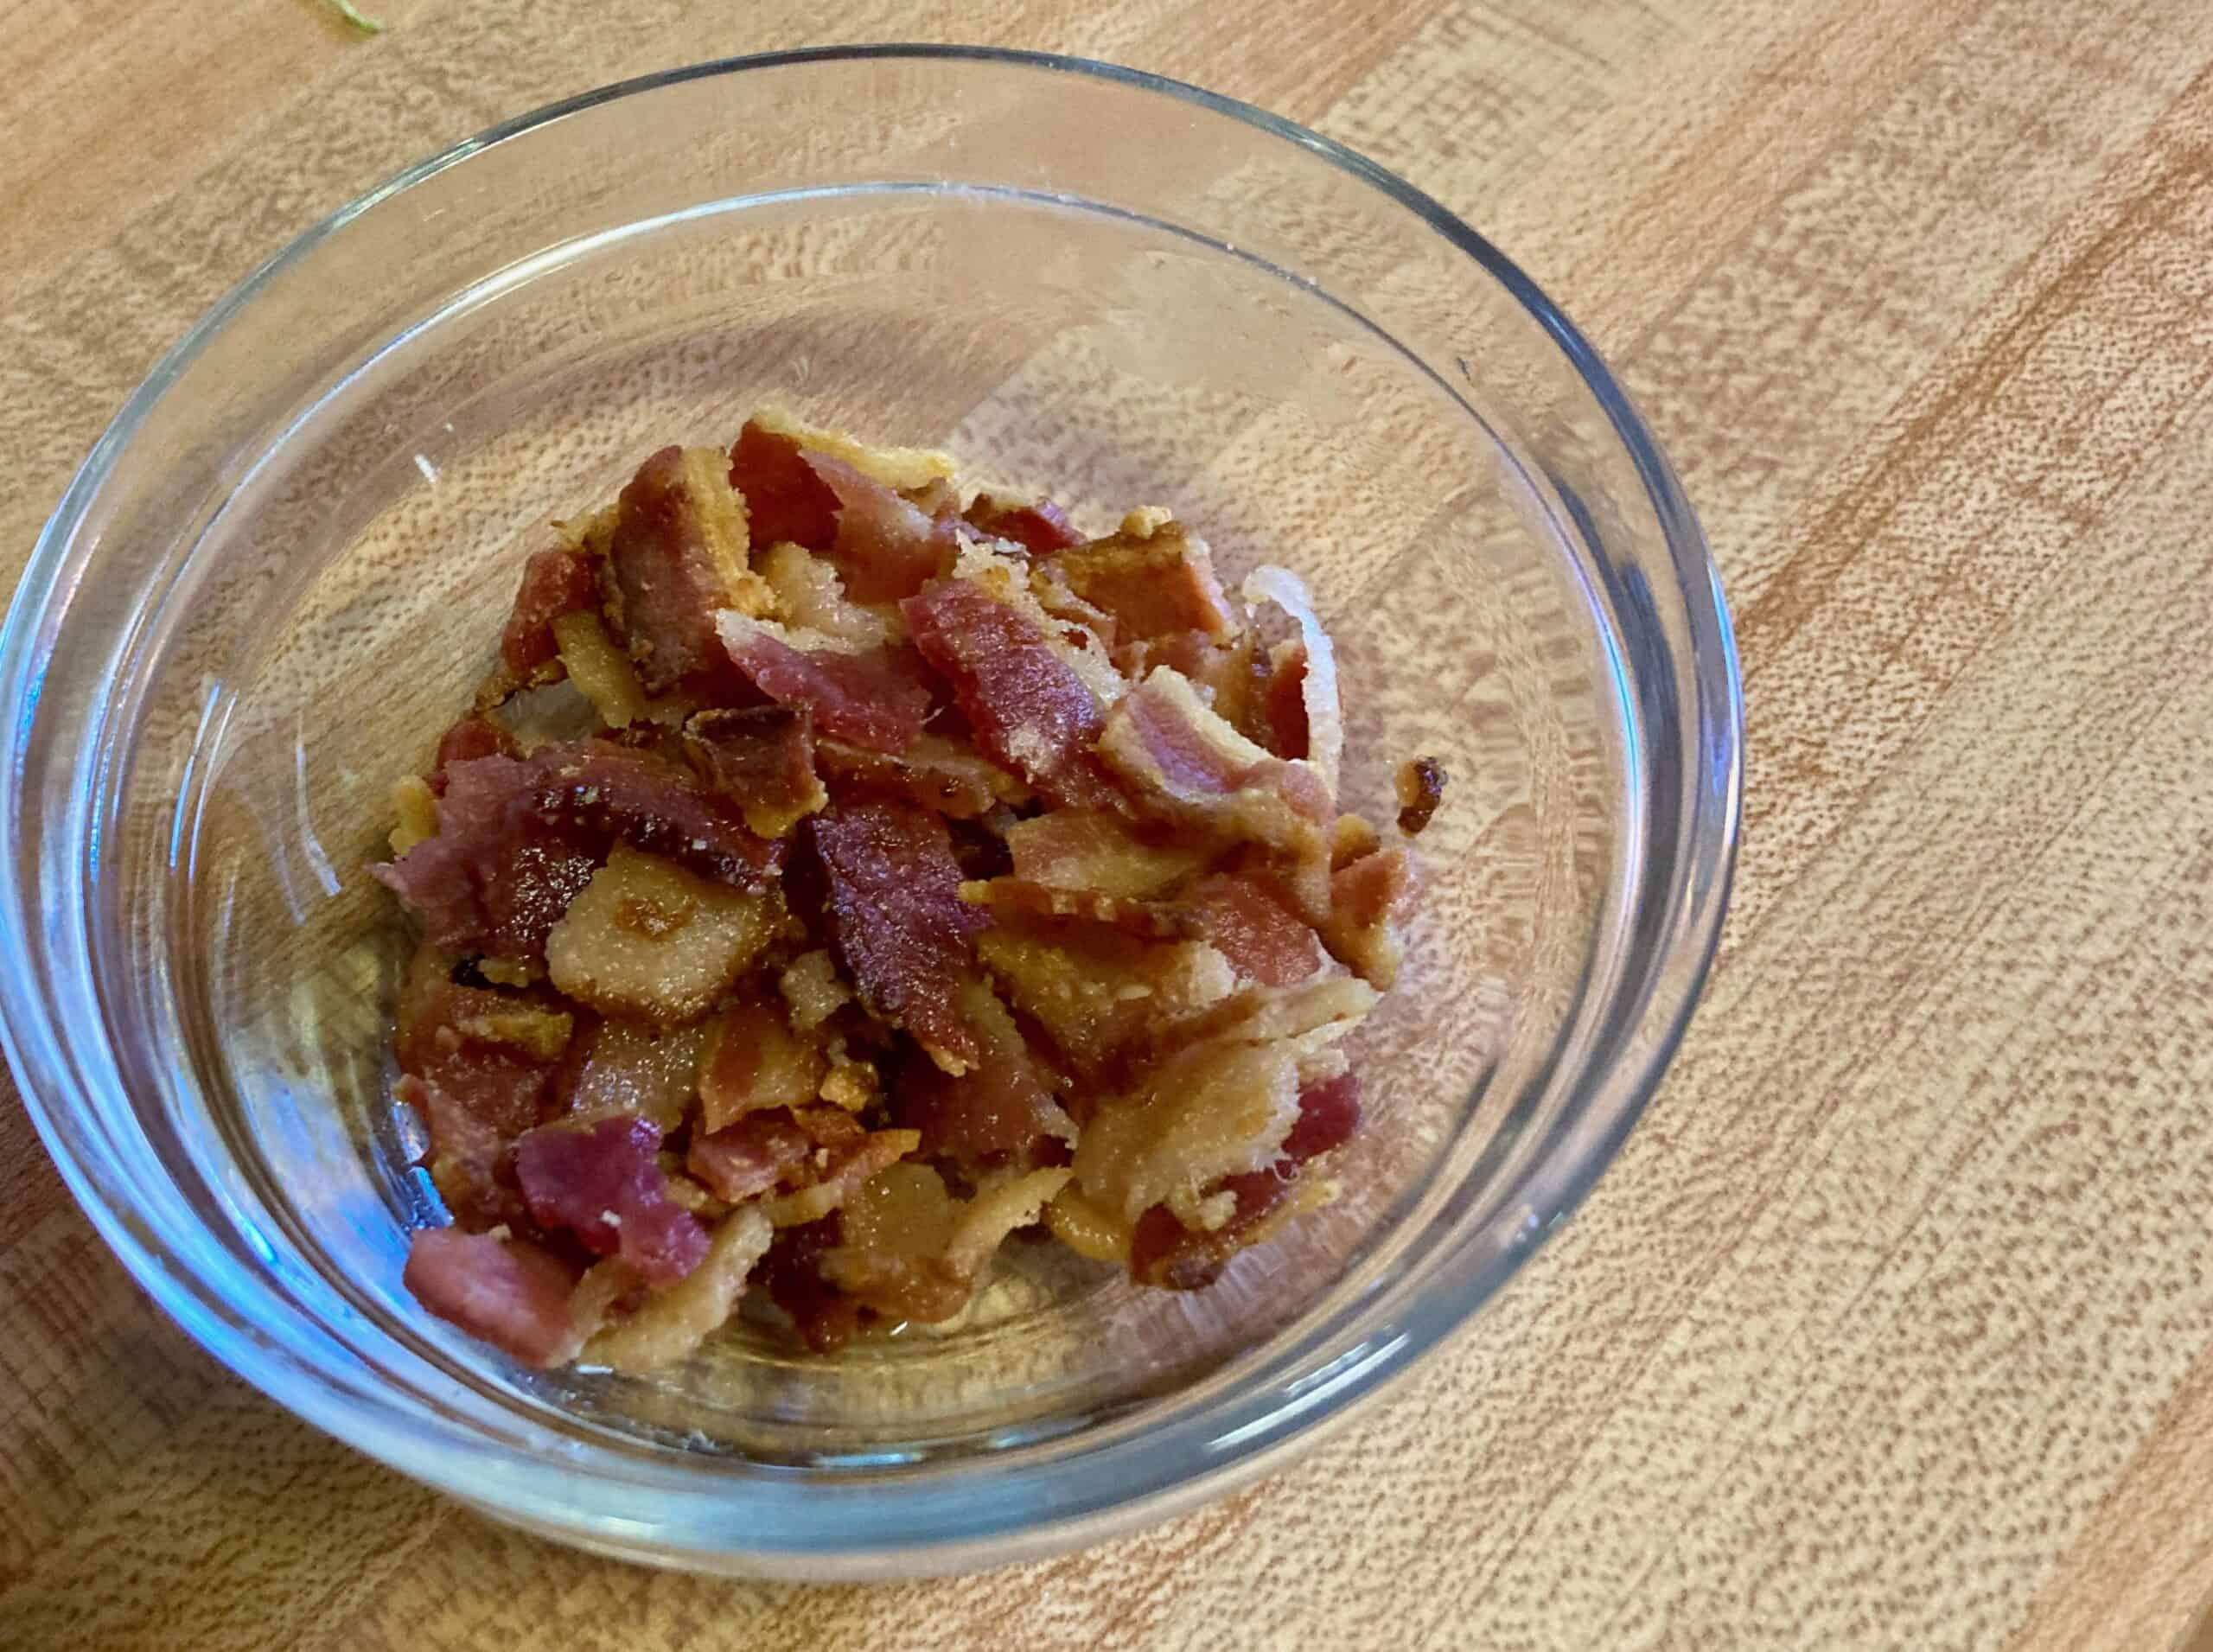 Crumbled bacon in small glass bowl.